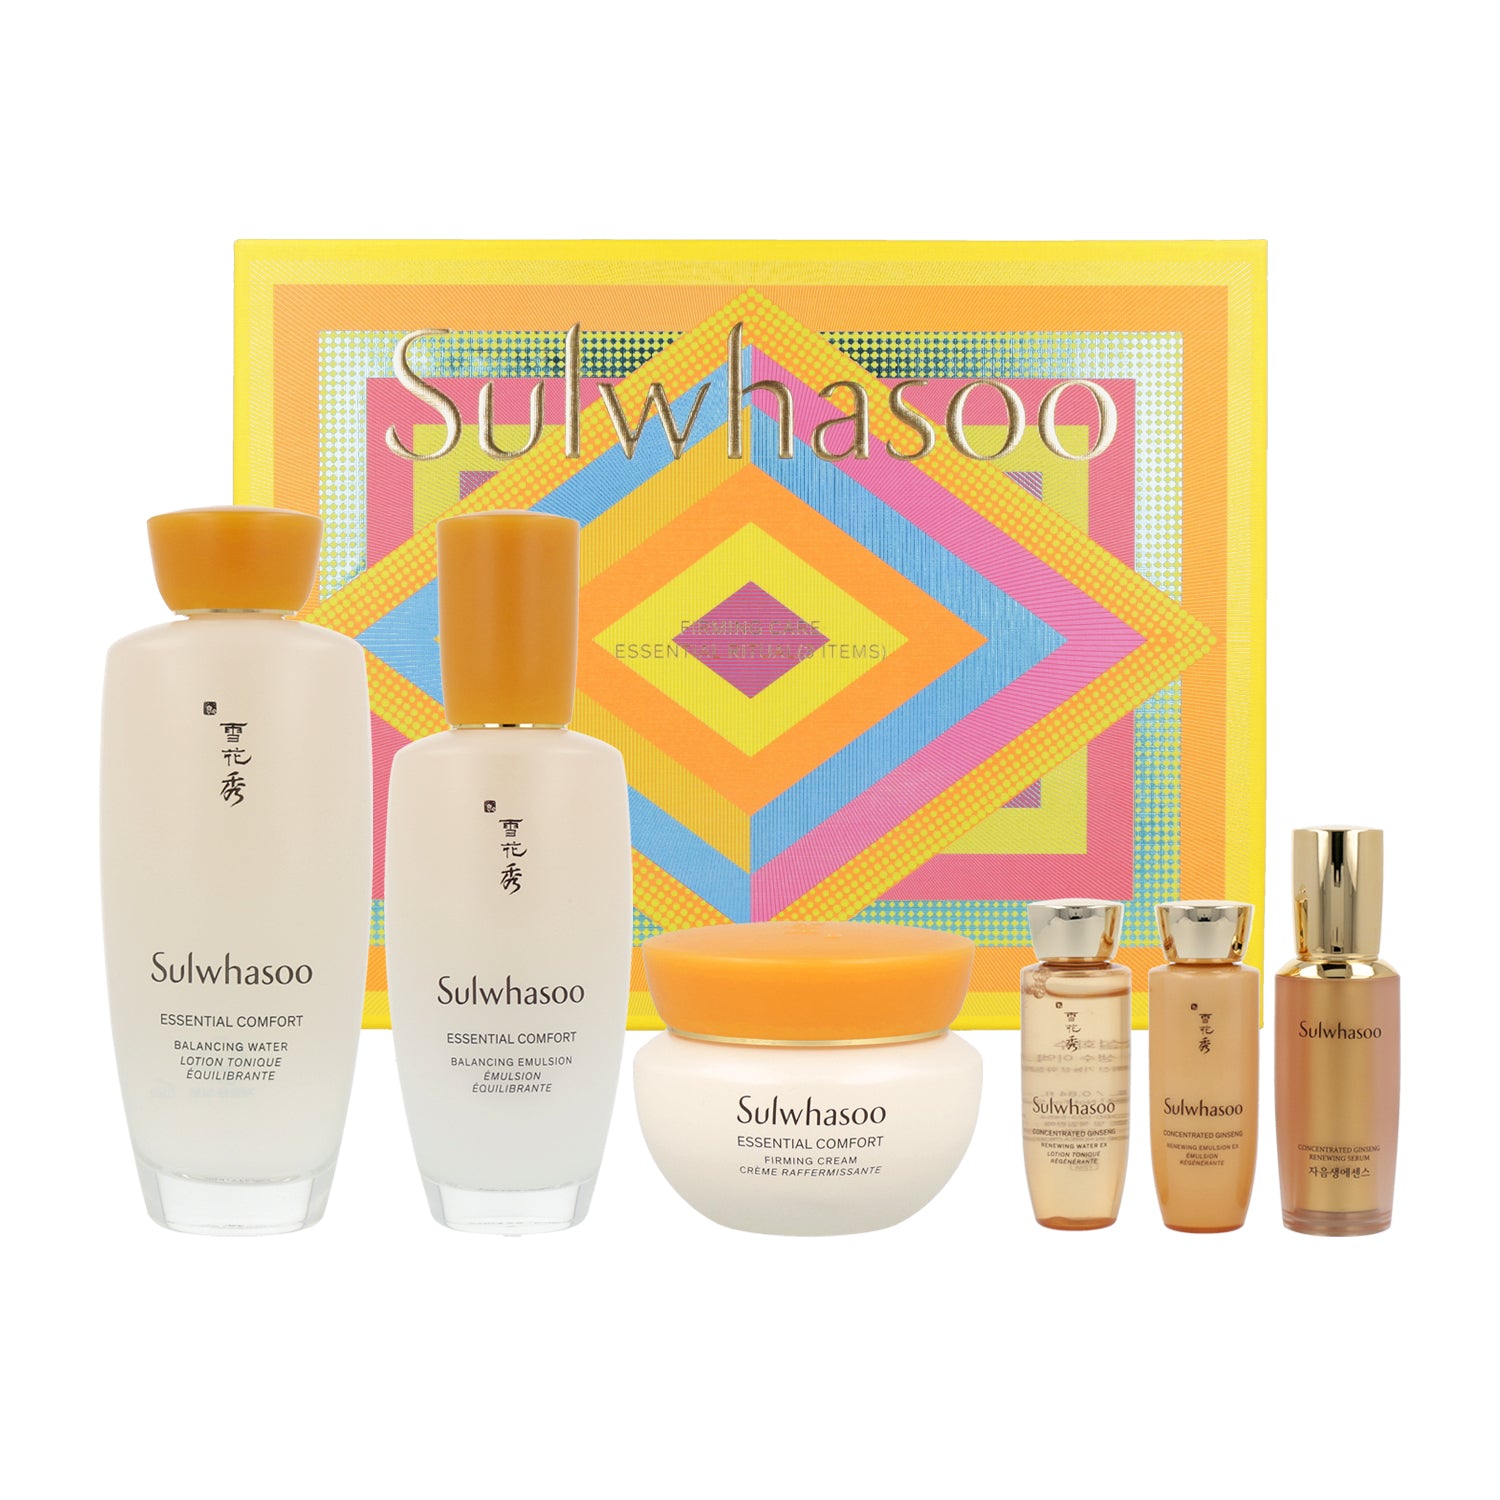 Sulwhasoo Firming Care Essential Ritual Set: A luxurious gift set with a gold box and a yellow box, containing 7 essential items.